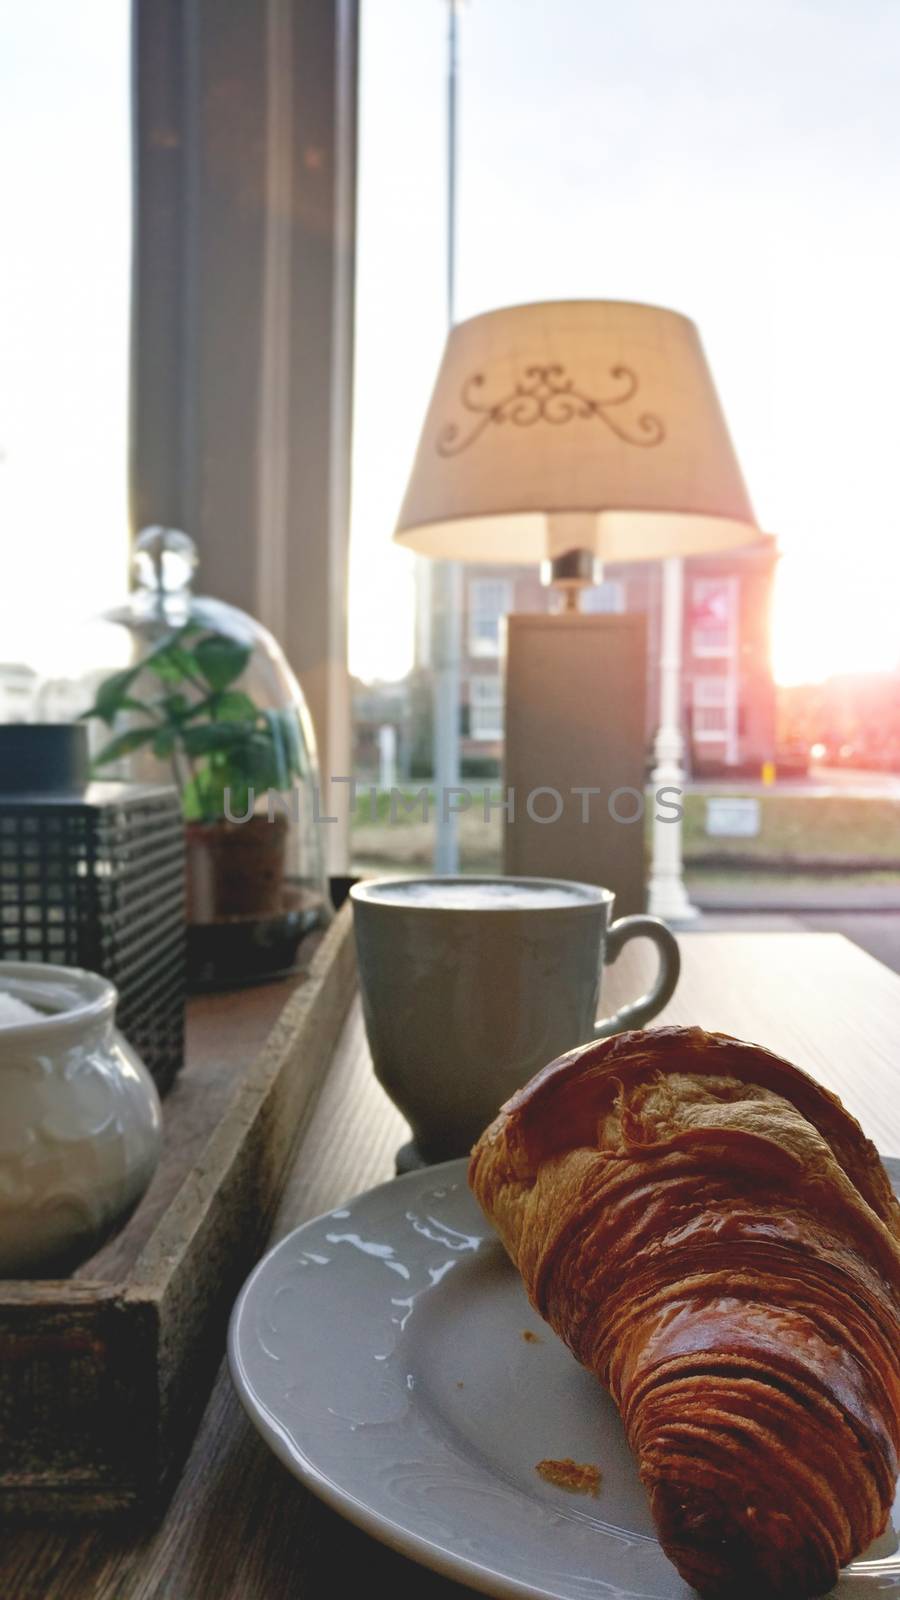 Cup of coffee and fresh baked croissants on plate for breakfast on the table near the window with city view